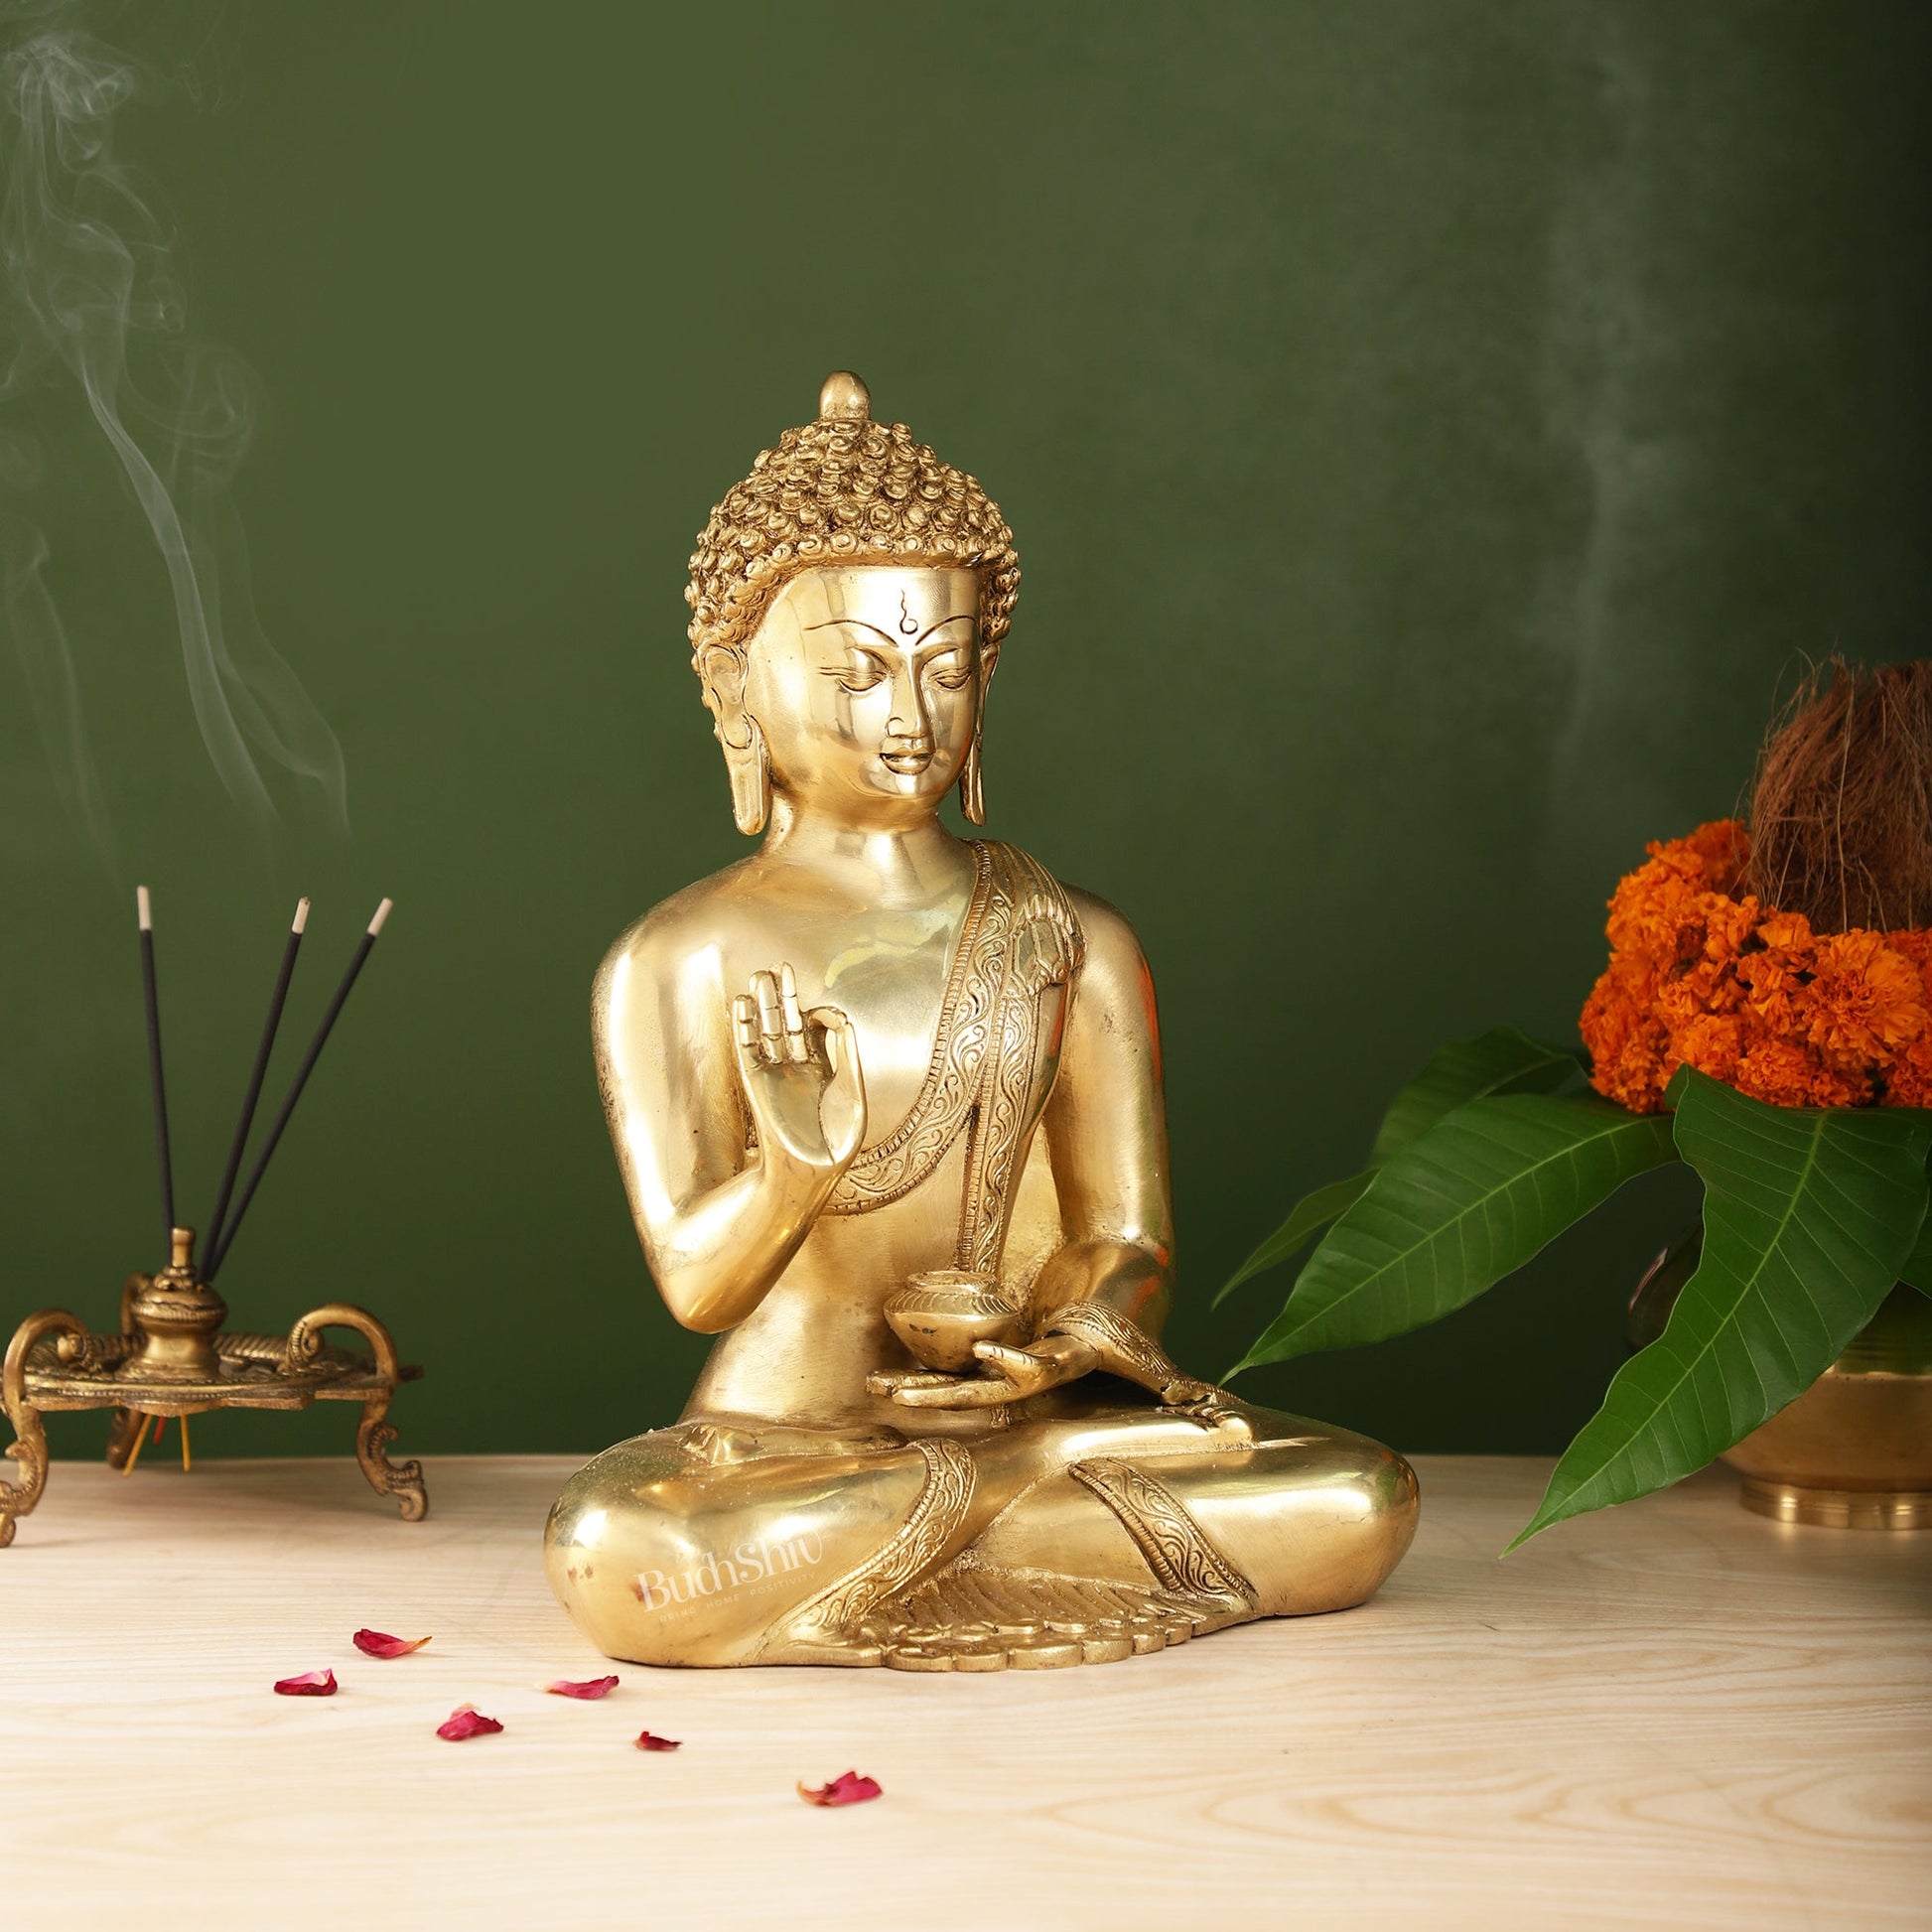 Pure Brass Blessing Buddha Statue | Handcrafted Fine Brass Sculpture 12 inch - Budhshiv.com